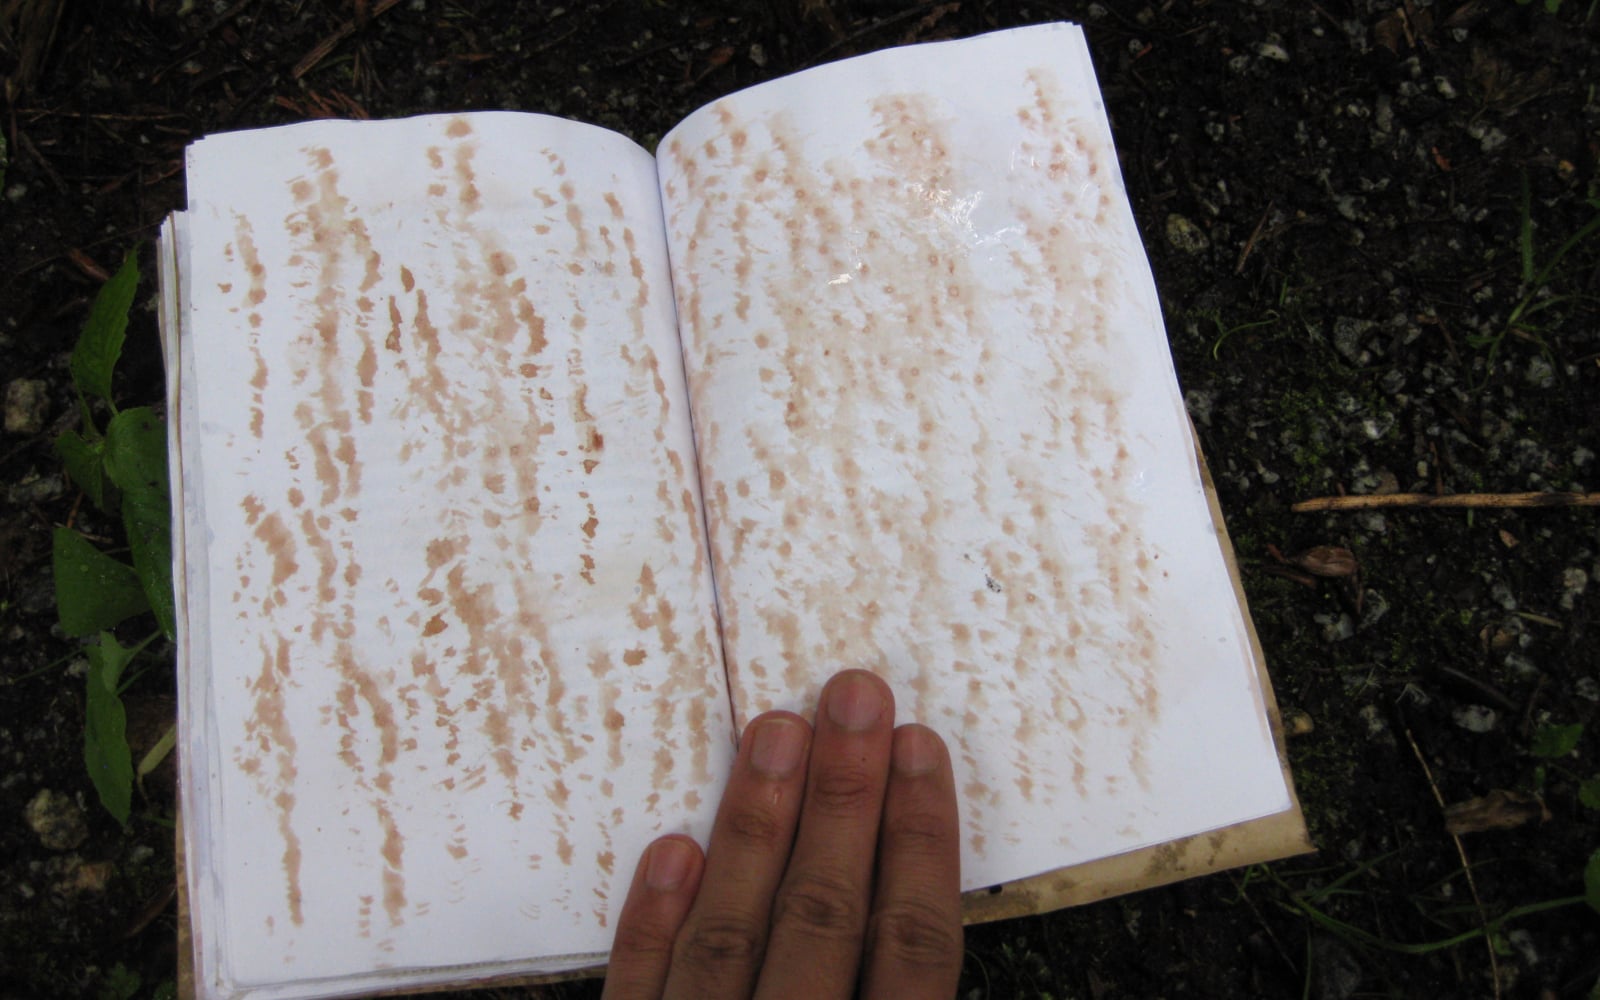 an open book on a wet forest floor. The pages are blank and have been treated with splashes of ink.